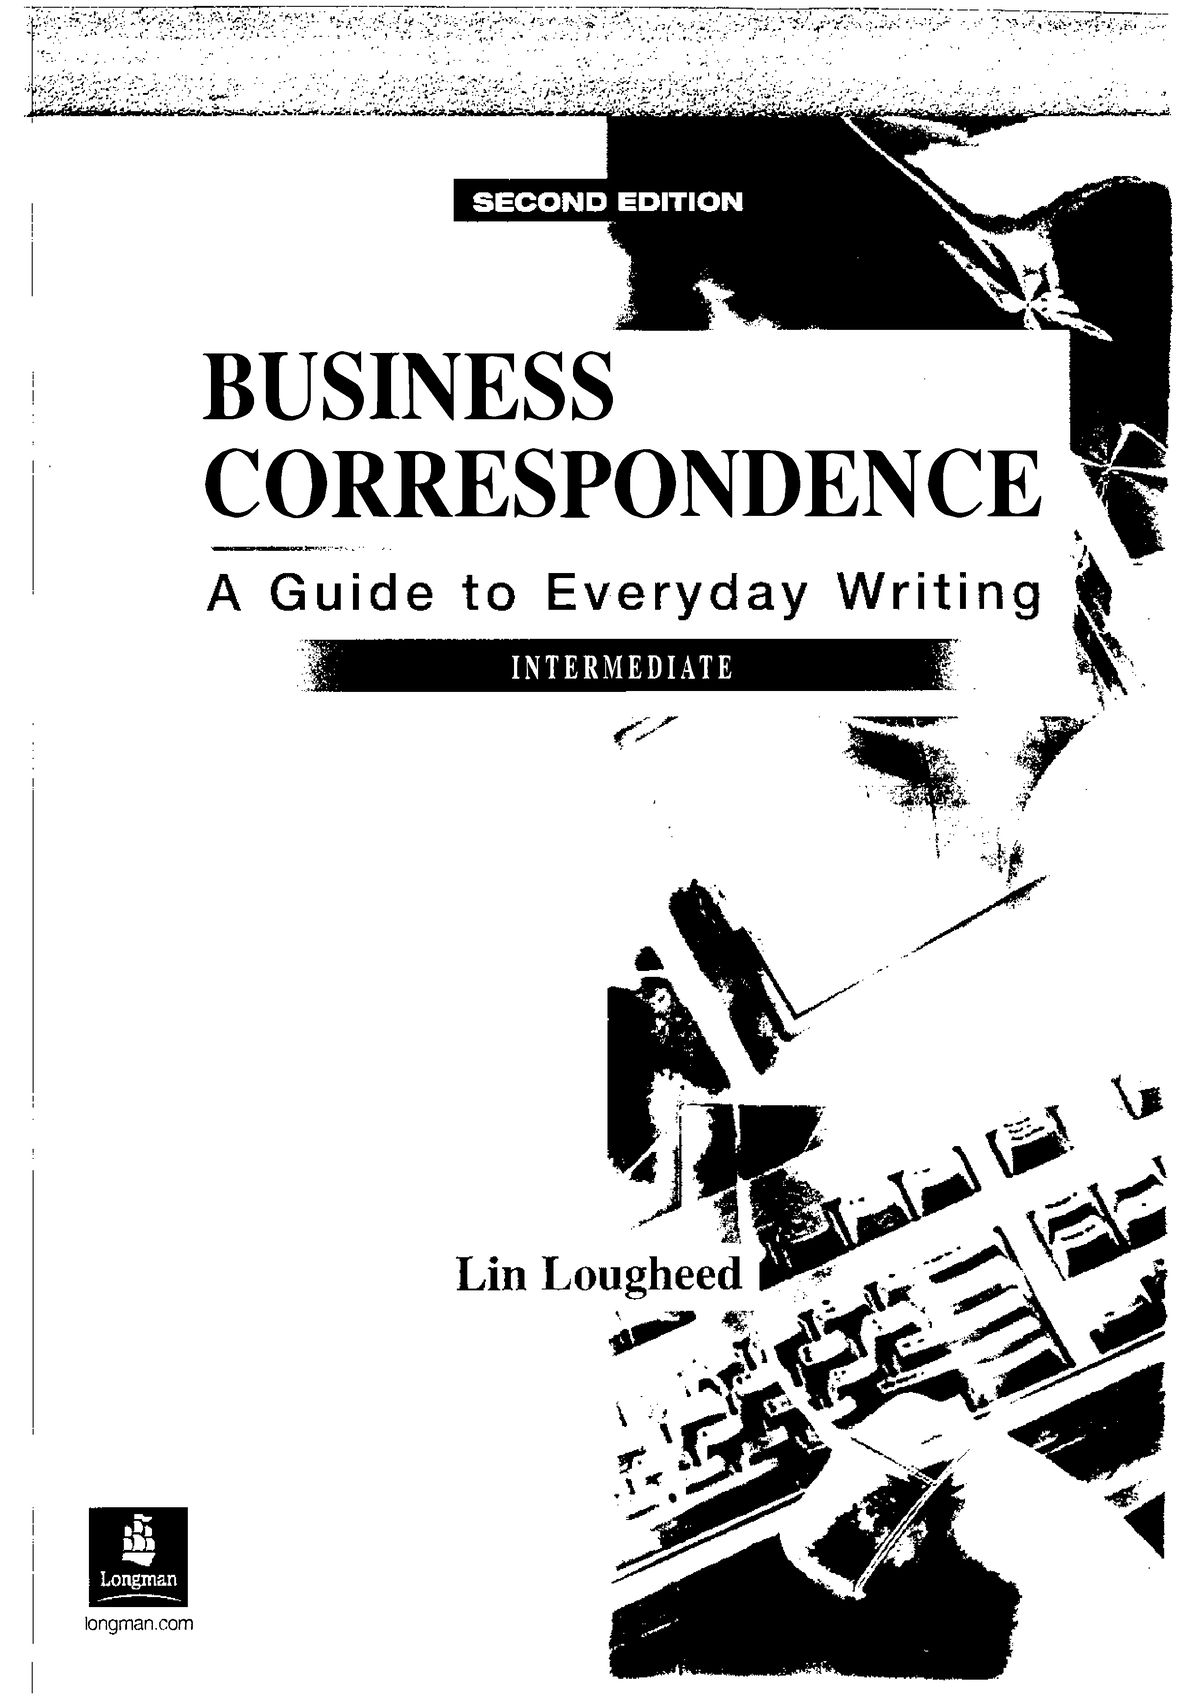 Business Correspondence A Guide to Everyday Writing 2002 - longman BUSINESS CORRESPONDENCE '.:� - Studocu